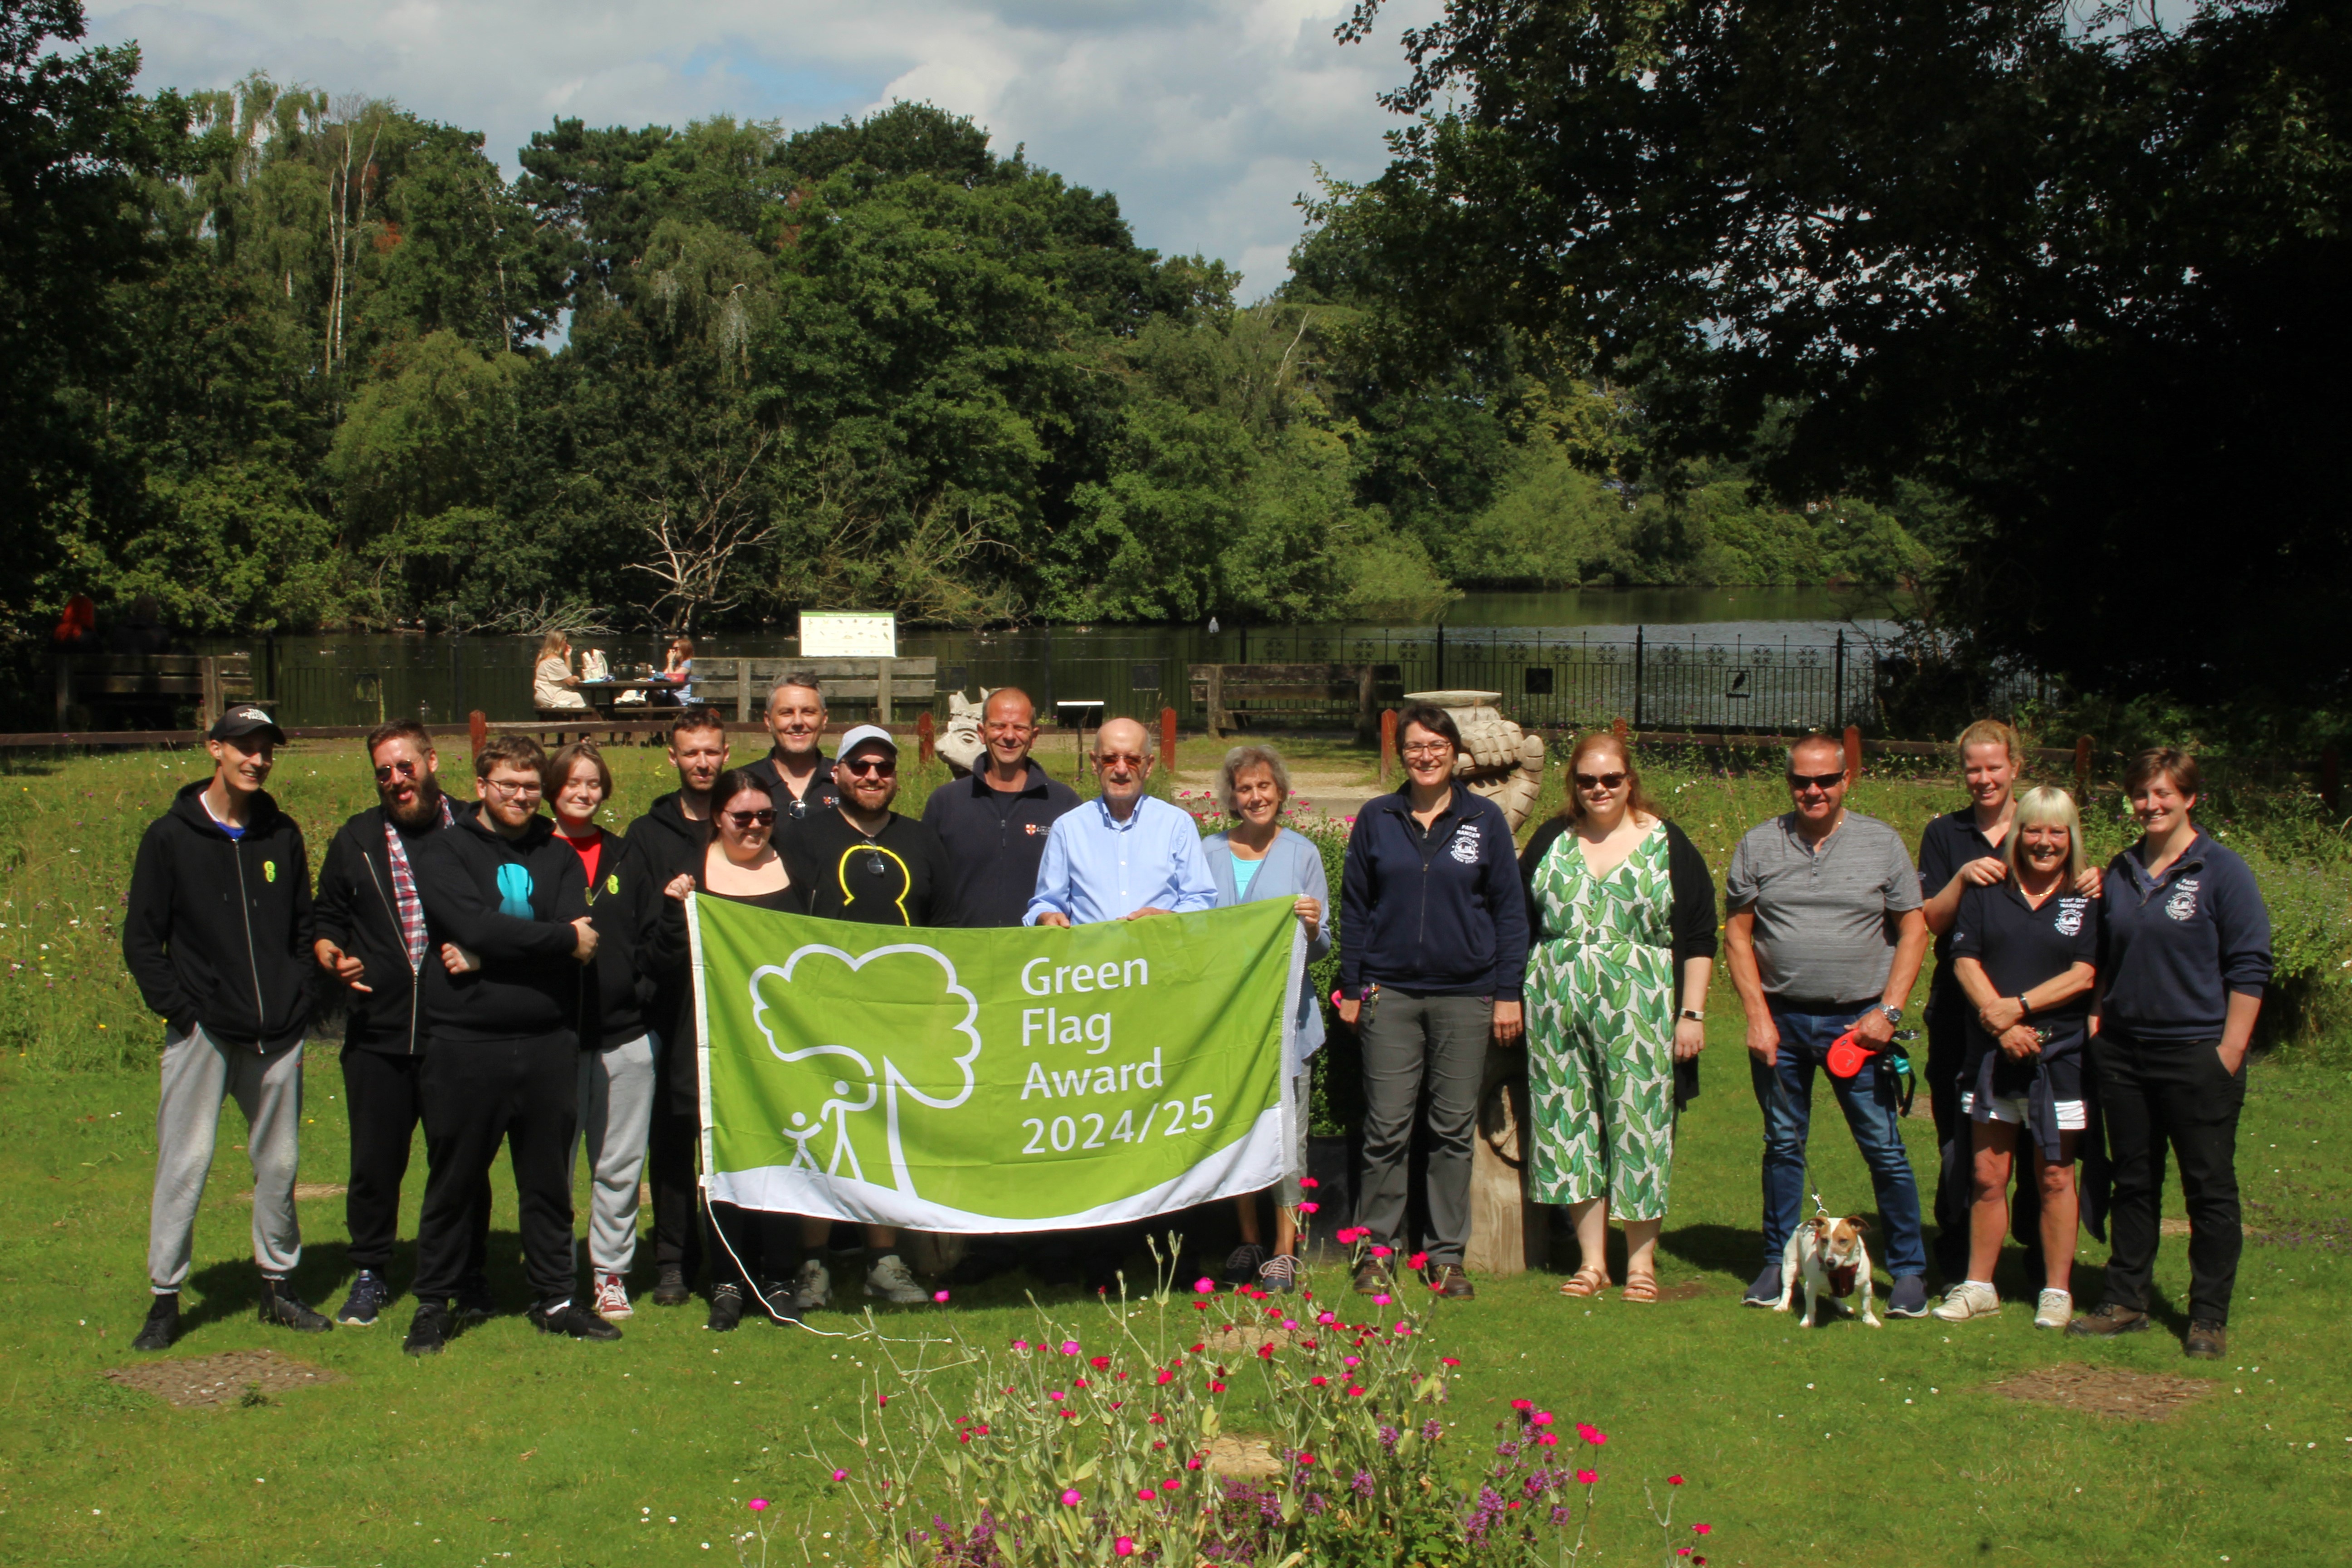 Hartsholme employees and local council members stood in Hartsholme Park holding Green Flag